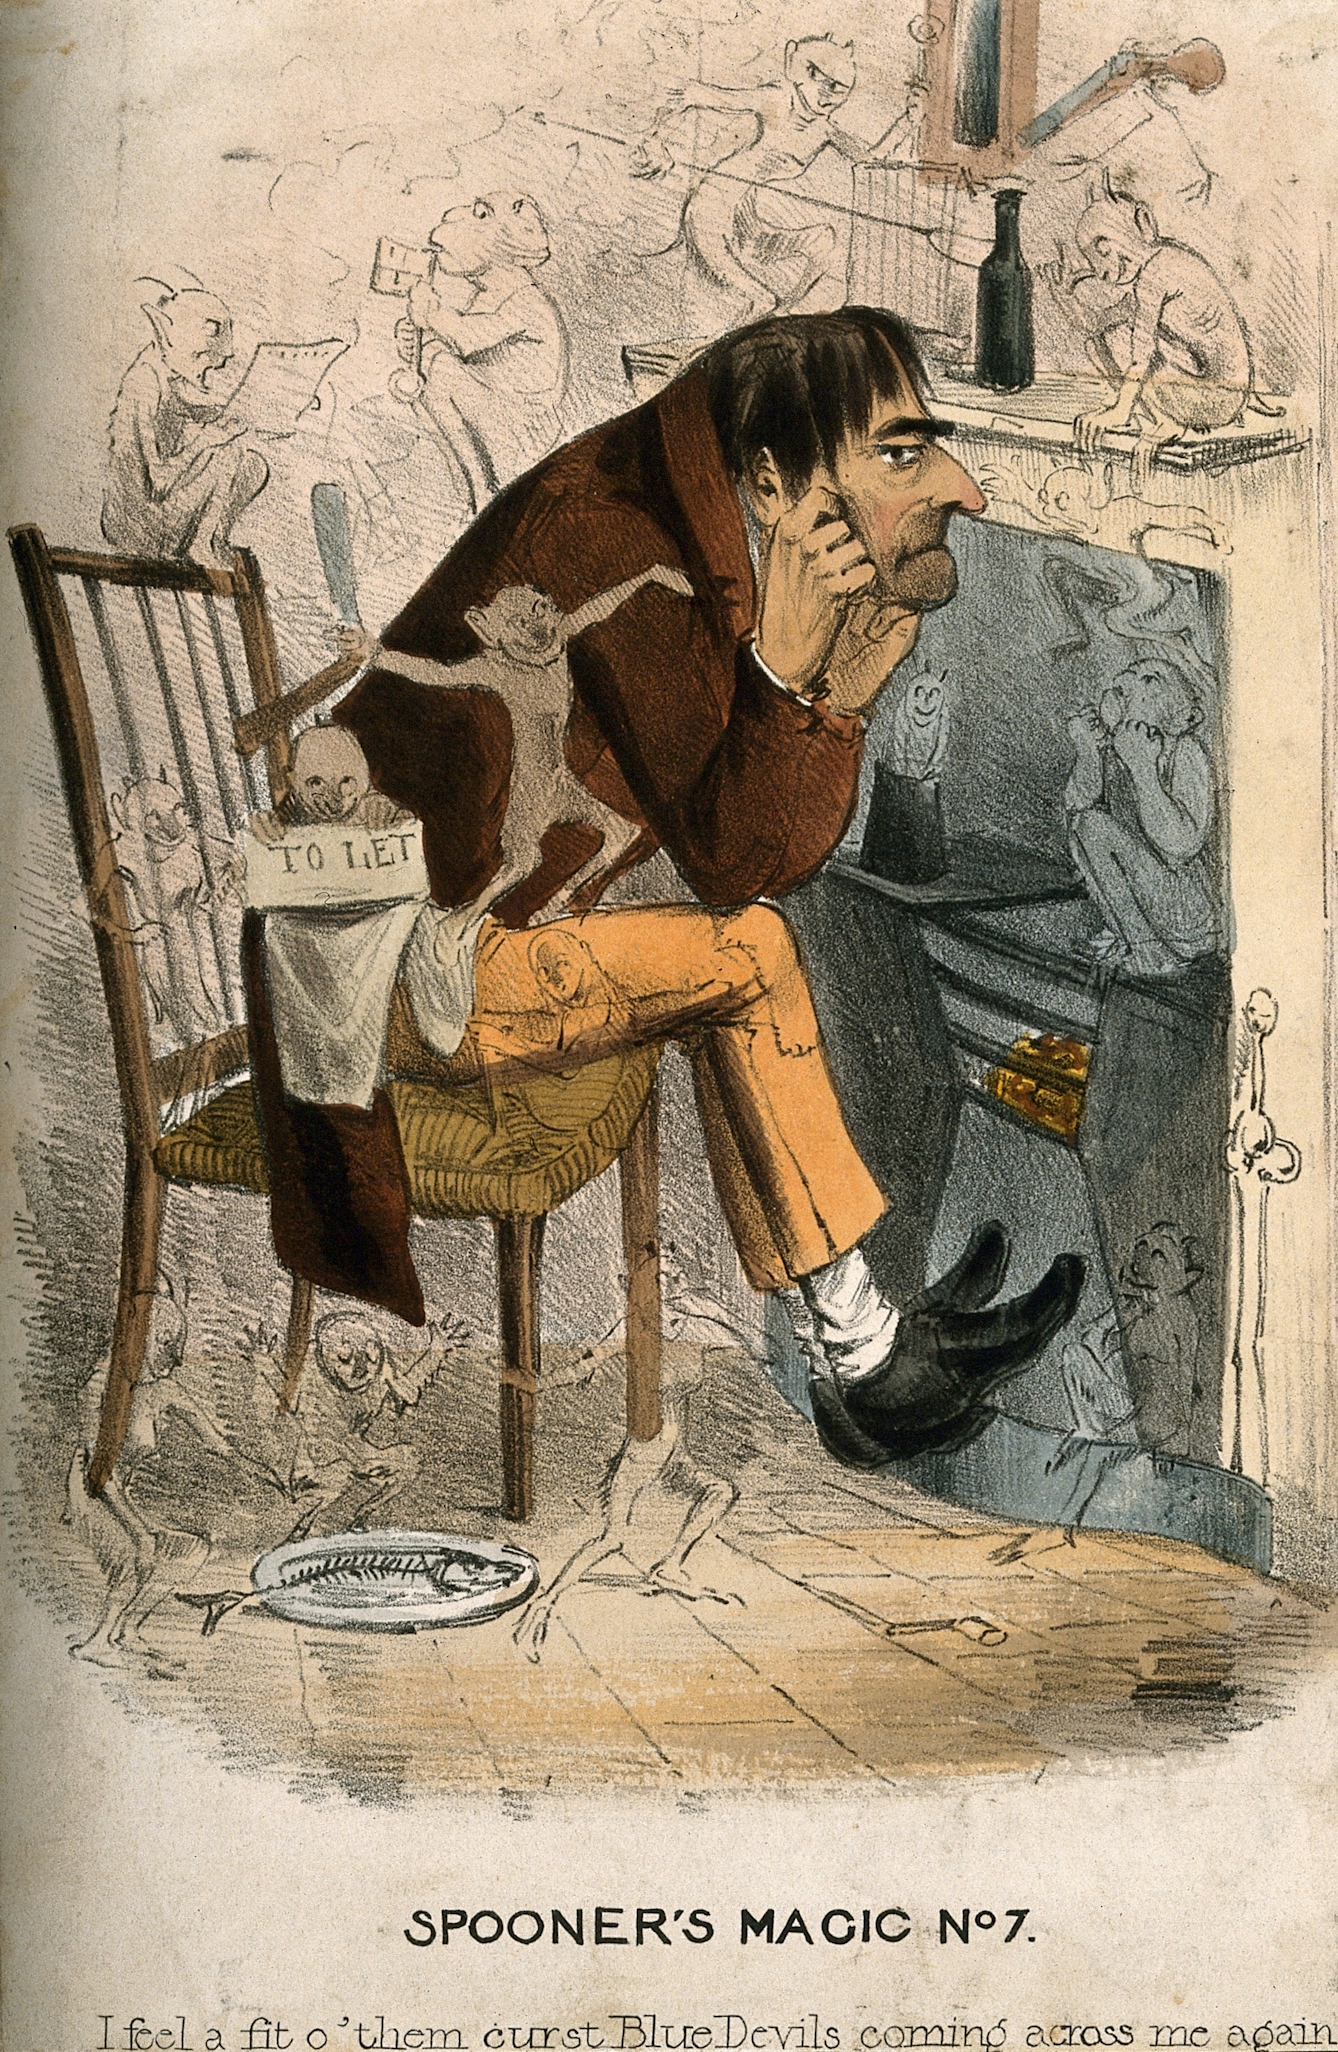 Caricature of a depressed man surrounded by 'blue devils' 